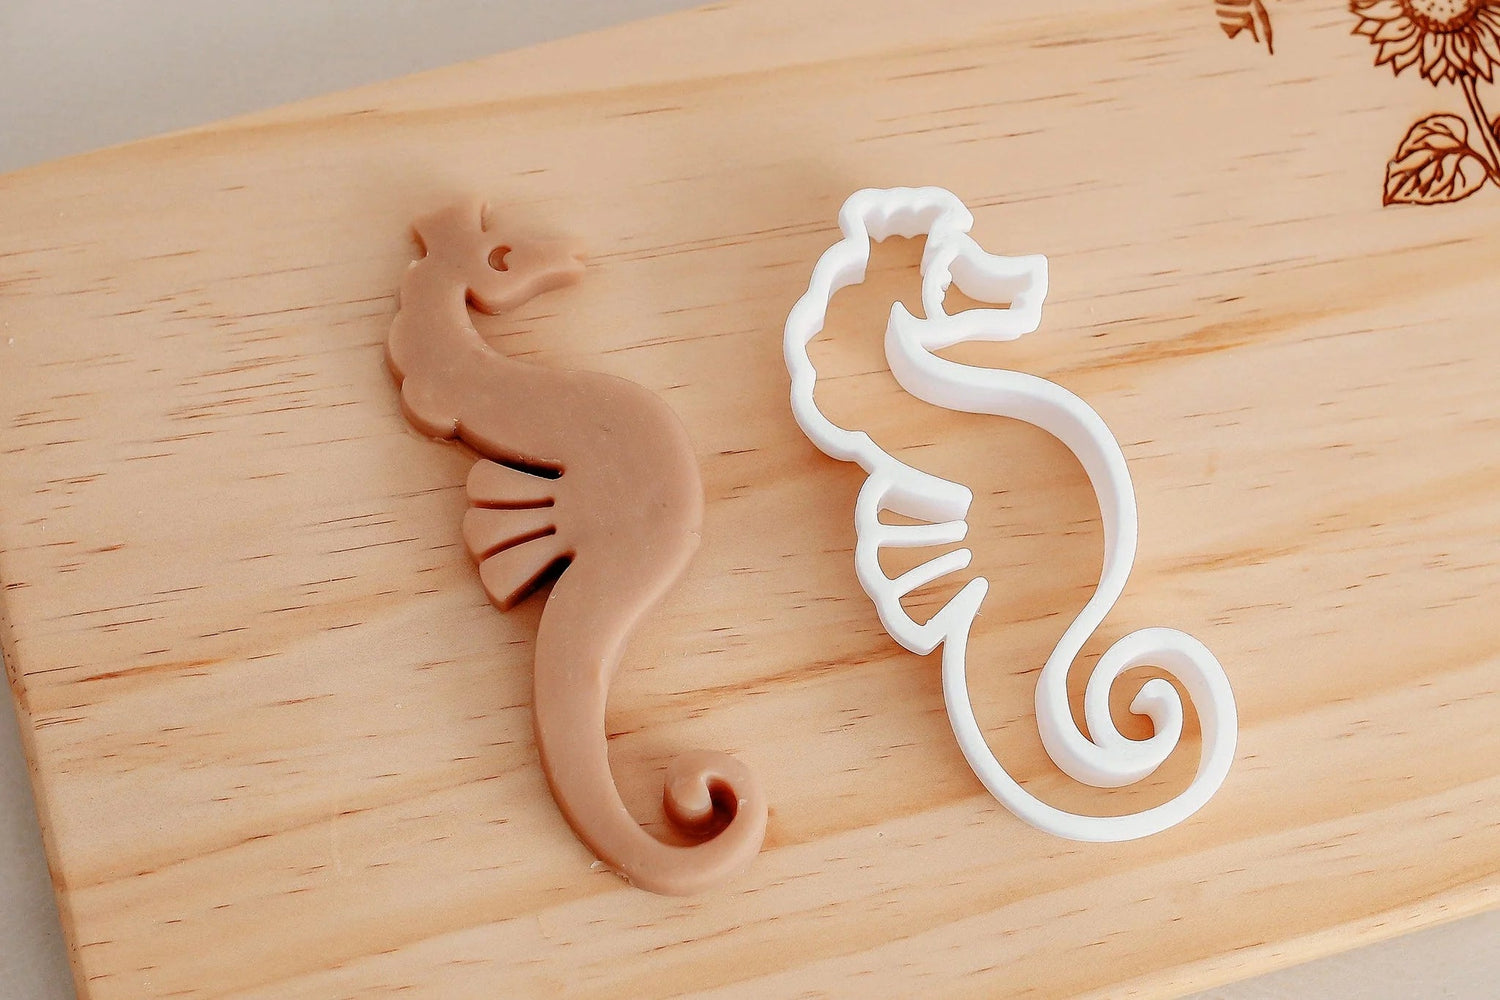 SEA HORSE BIO CUTTER by BEADIE BUG PLAY - The Playful Collective